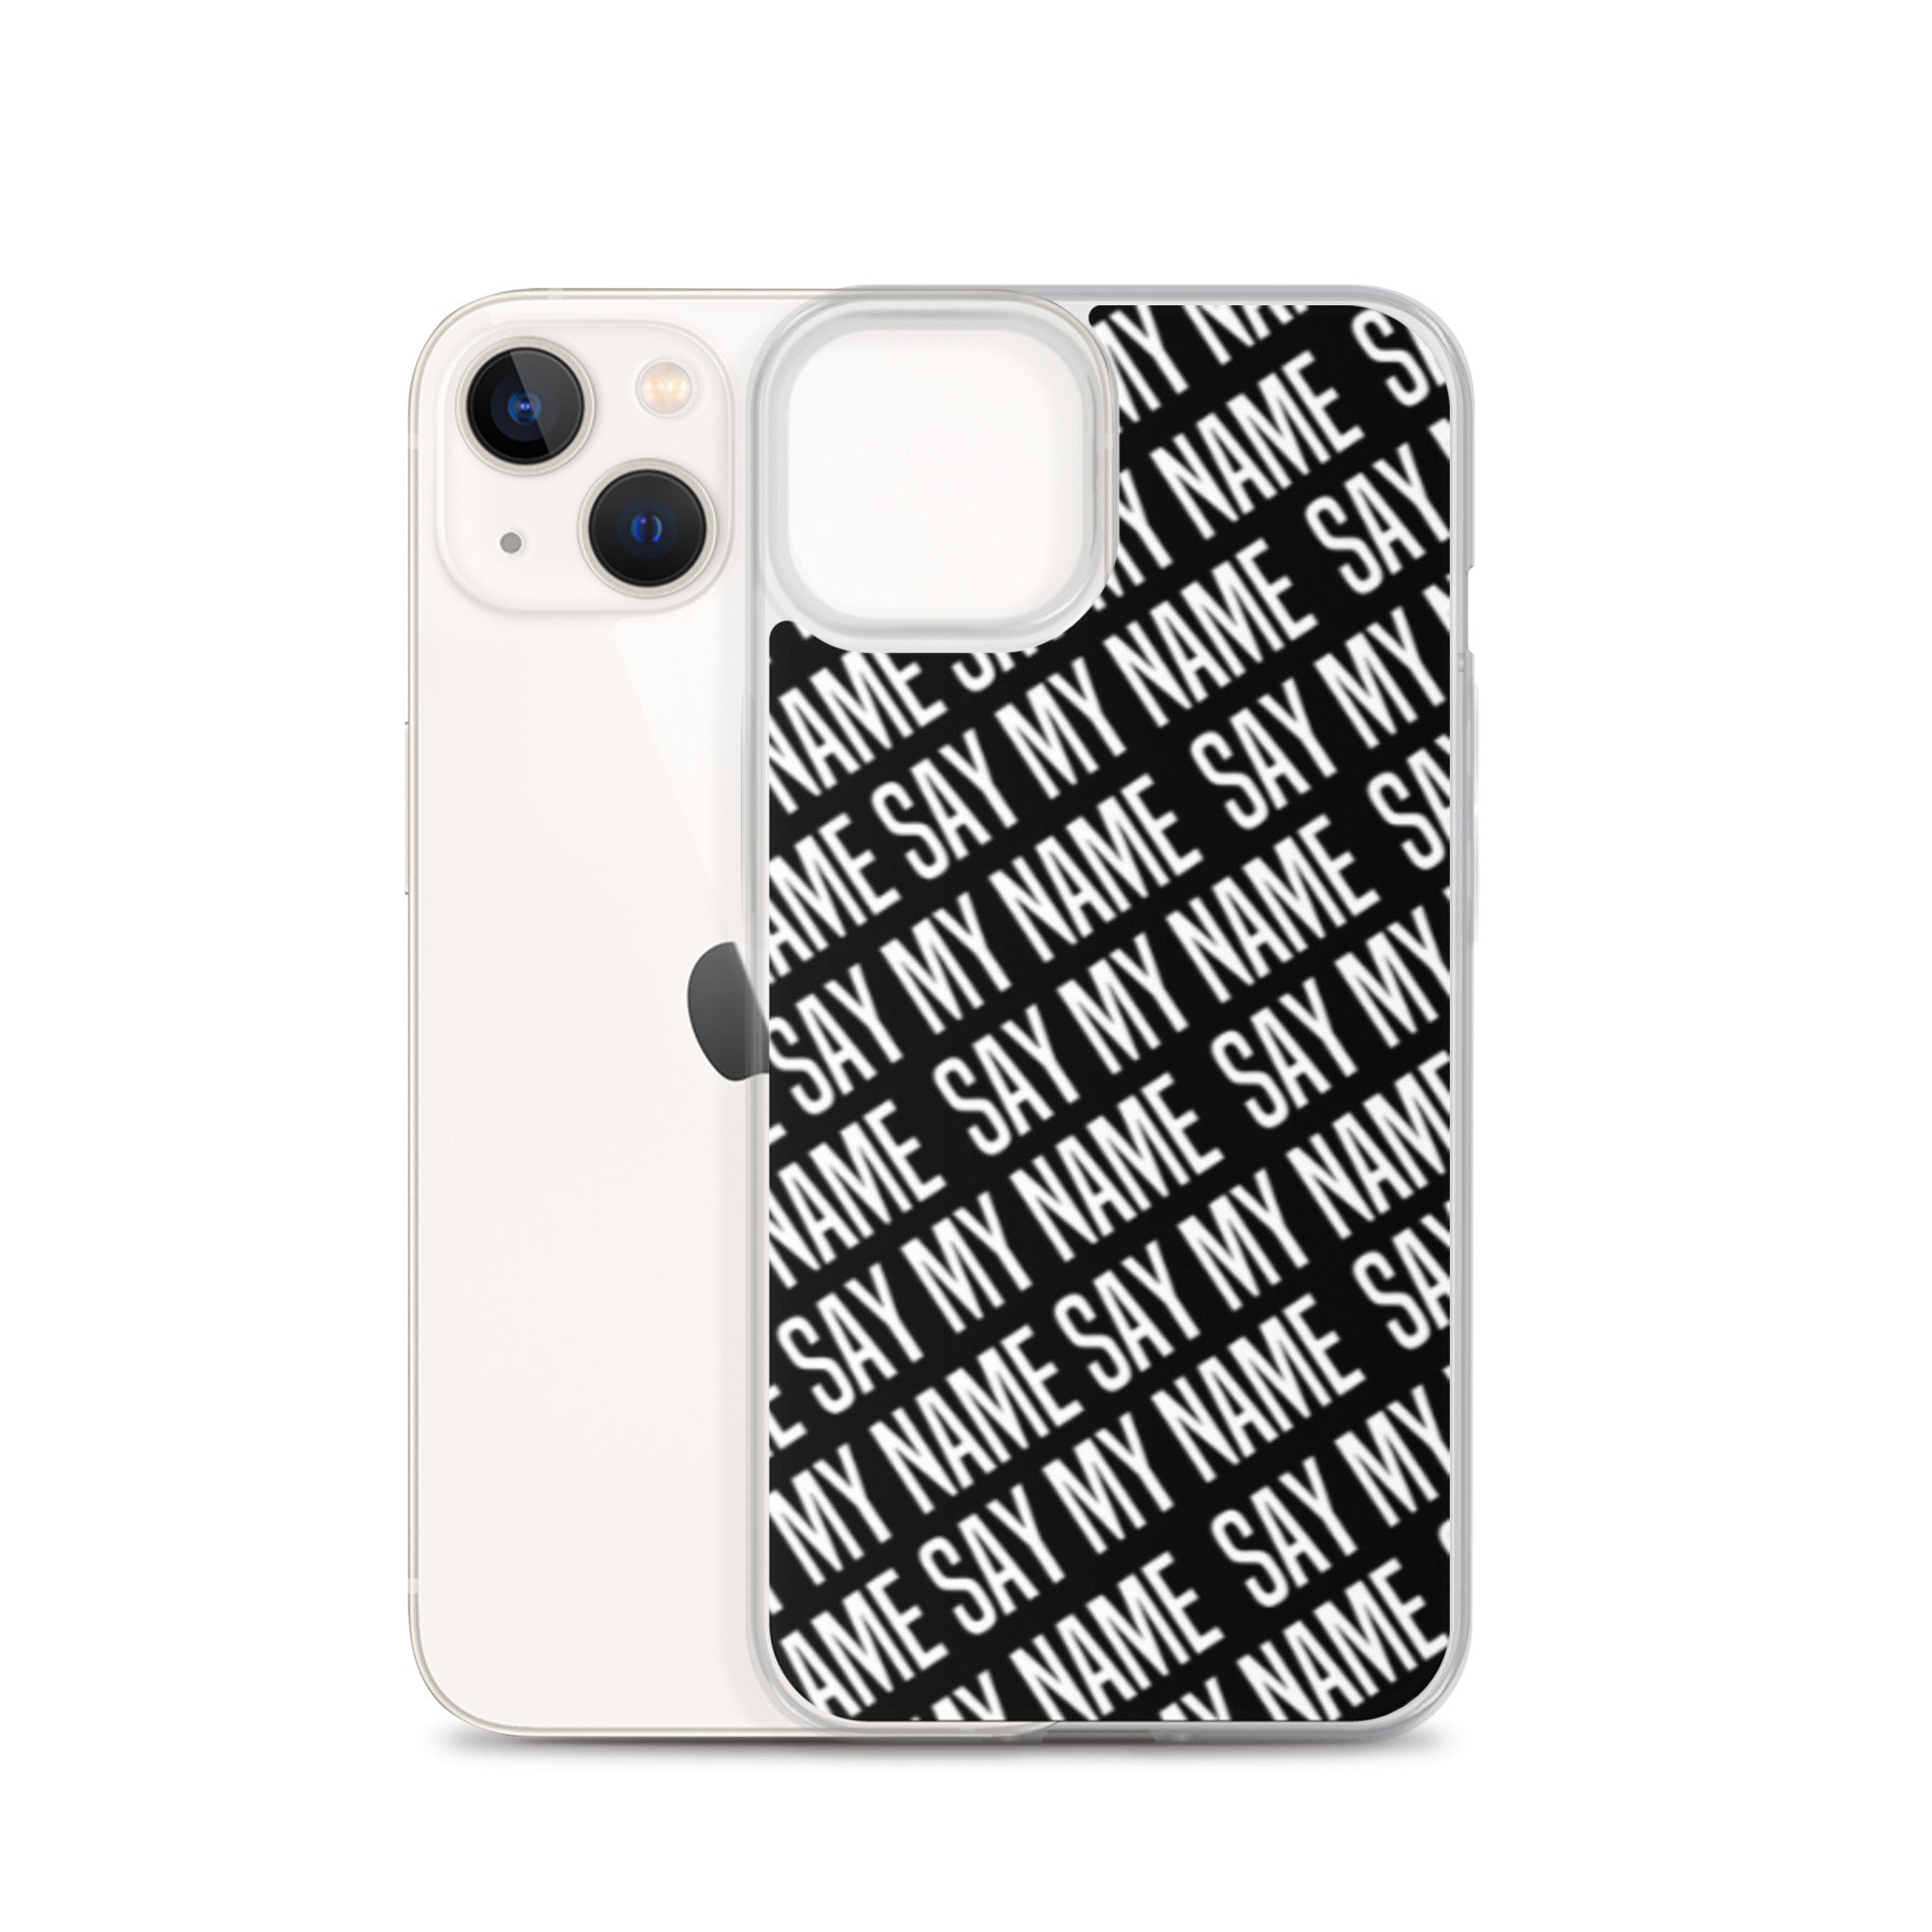 Coque "SAY MY NAME" iPhone